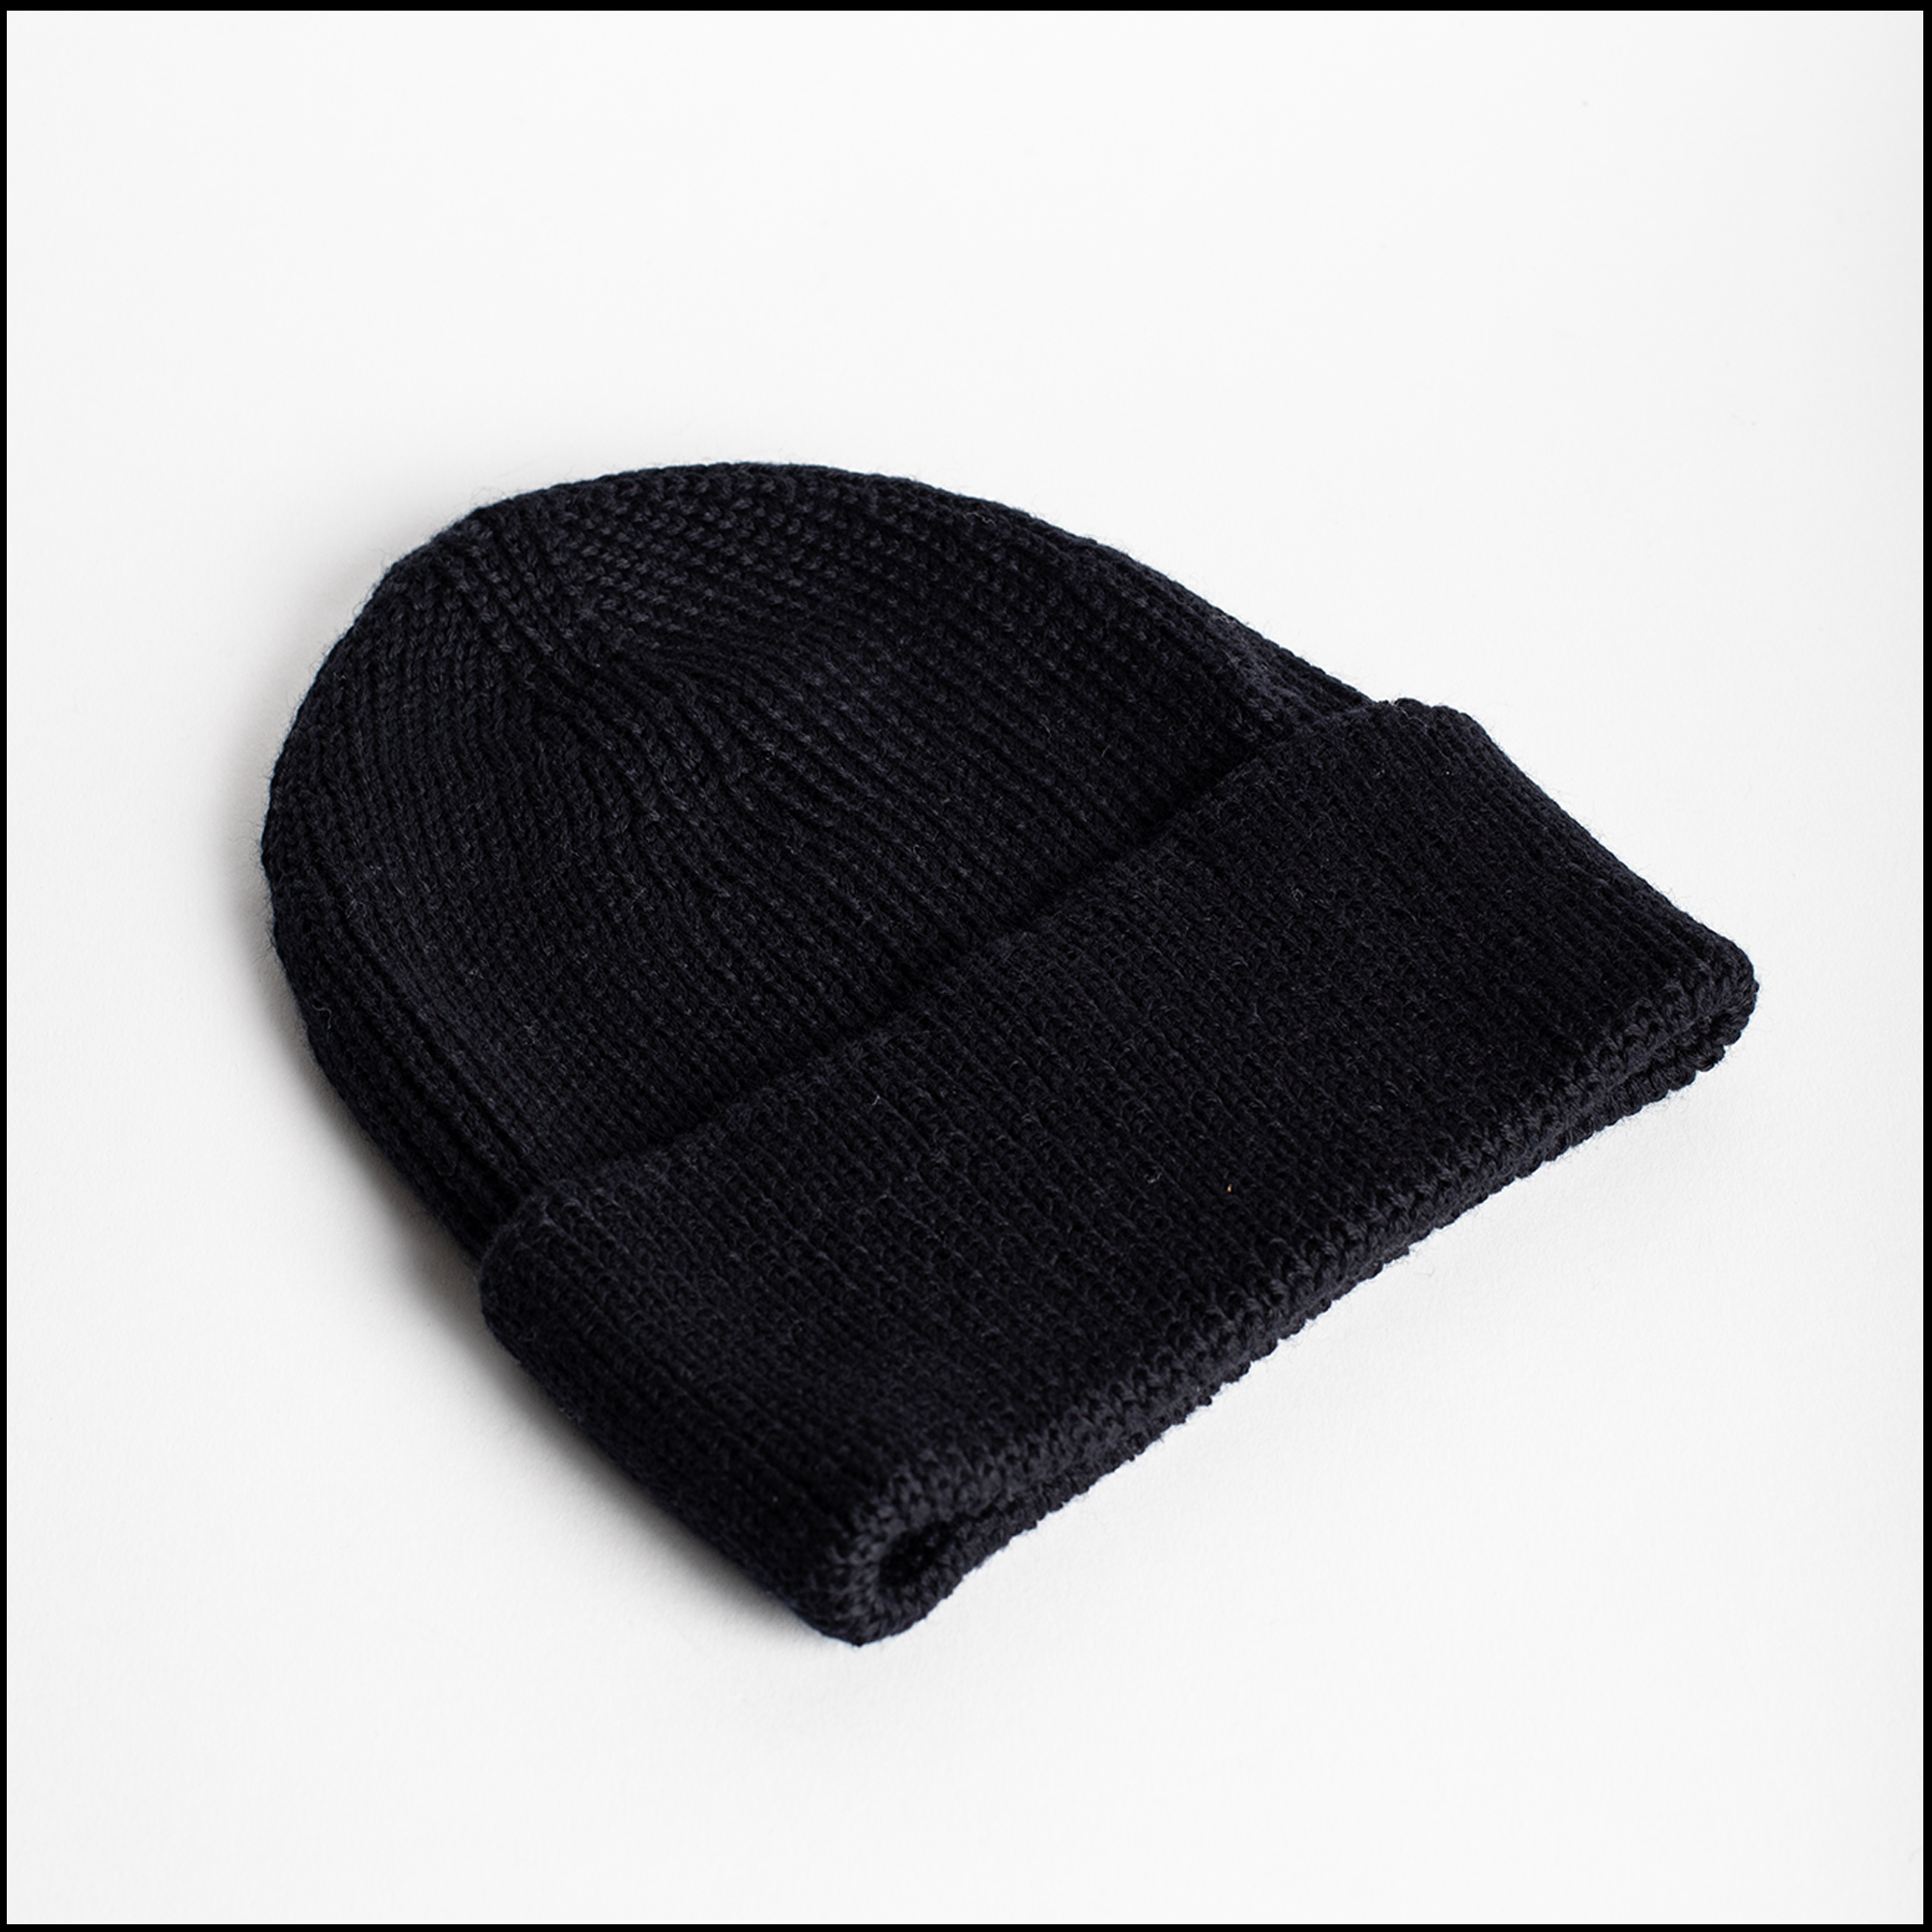 VICKO beanie in Black color by Arpenteur